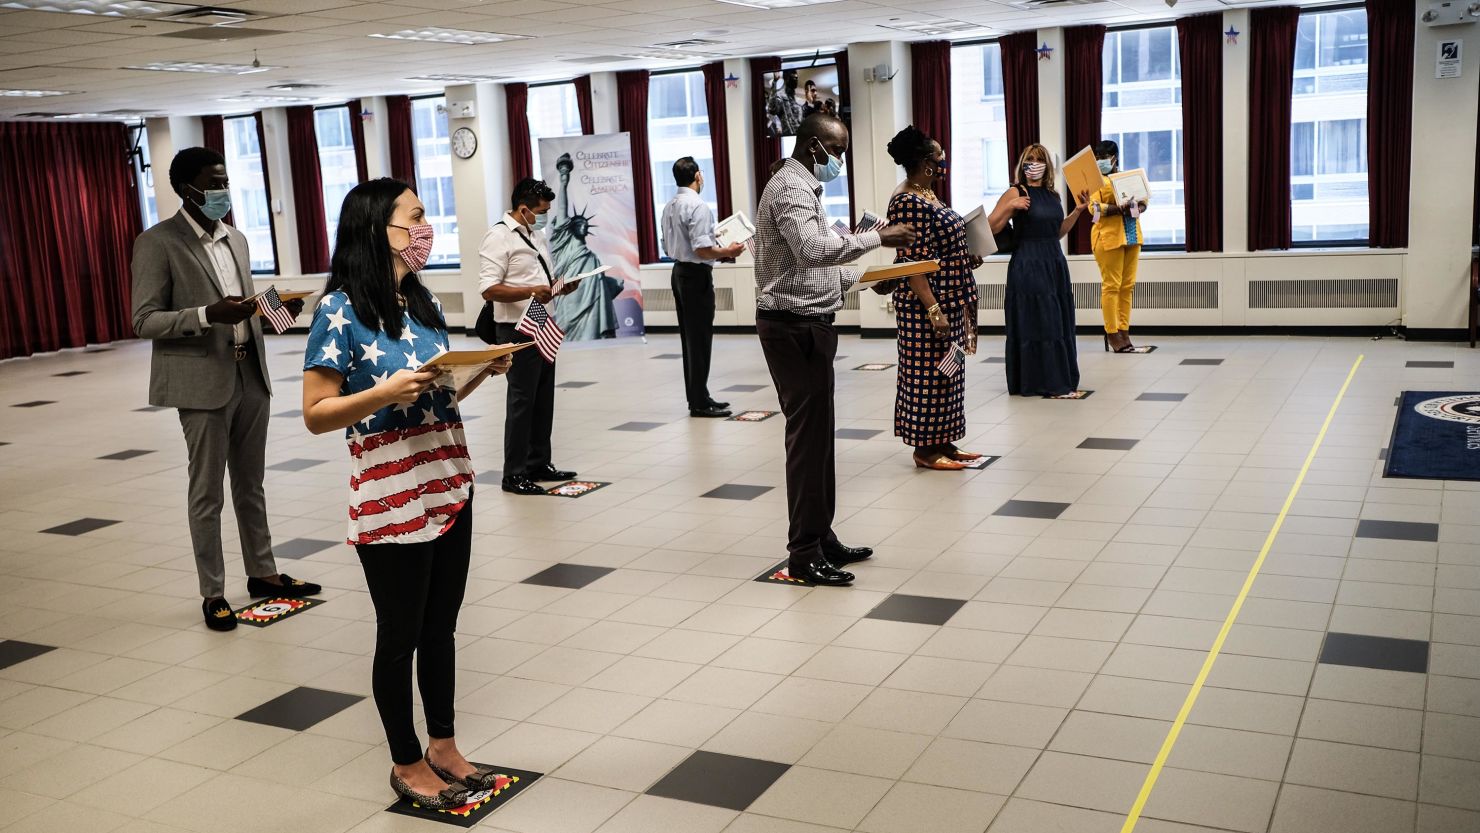 People are sworn in as new American citizens during a ceremony at the U.S. Citizenship and Immigration Services New York Field Office on July 2 in New York City.